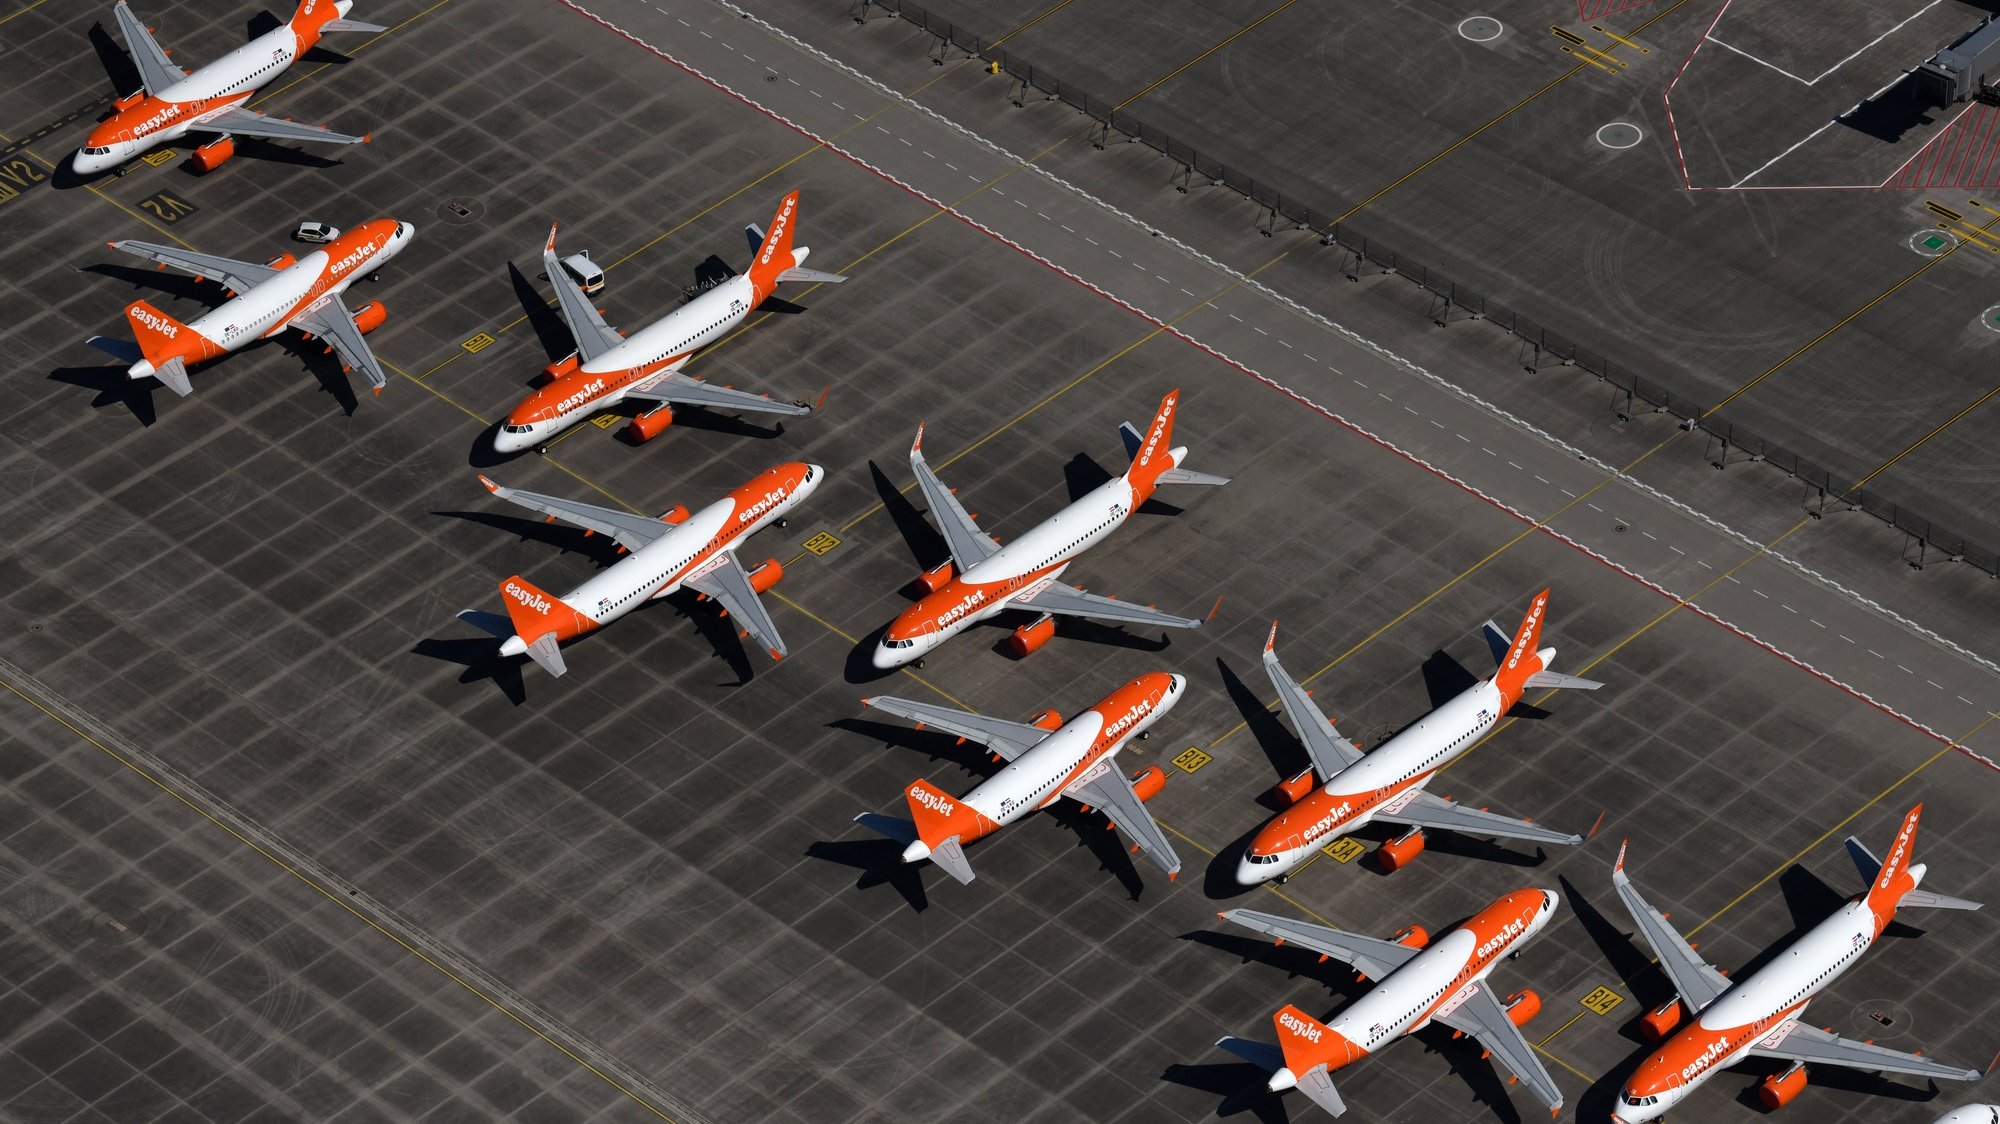 epa08388424 An aerial view shows air planes of EasyJet sitting on the tarmac at the Berlin Brandenburg International Airport in Schoenefeld, Germany, 23 April 2020 (issued 28 April 2020). Due to personal contact restrictions, which were implemented as part of measures to stem the spread of the SARS-CoV-2 coronavirus, gatherings of more than two persons are forbidden in Germany.  EPA/OLIVER LANG